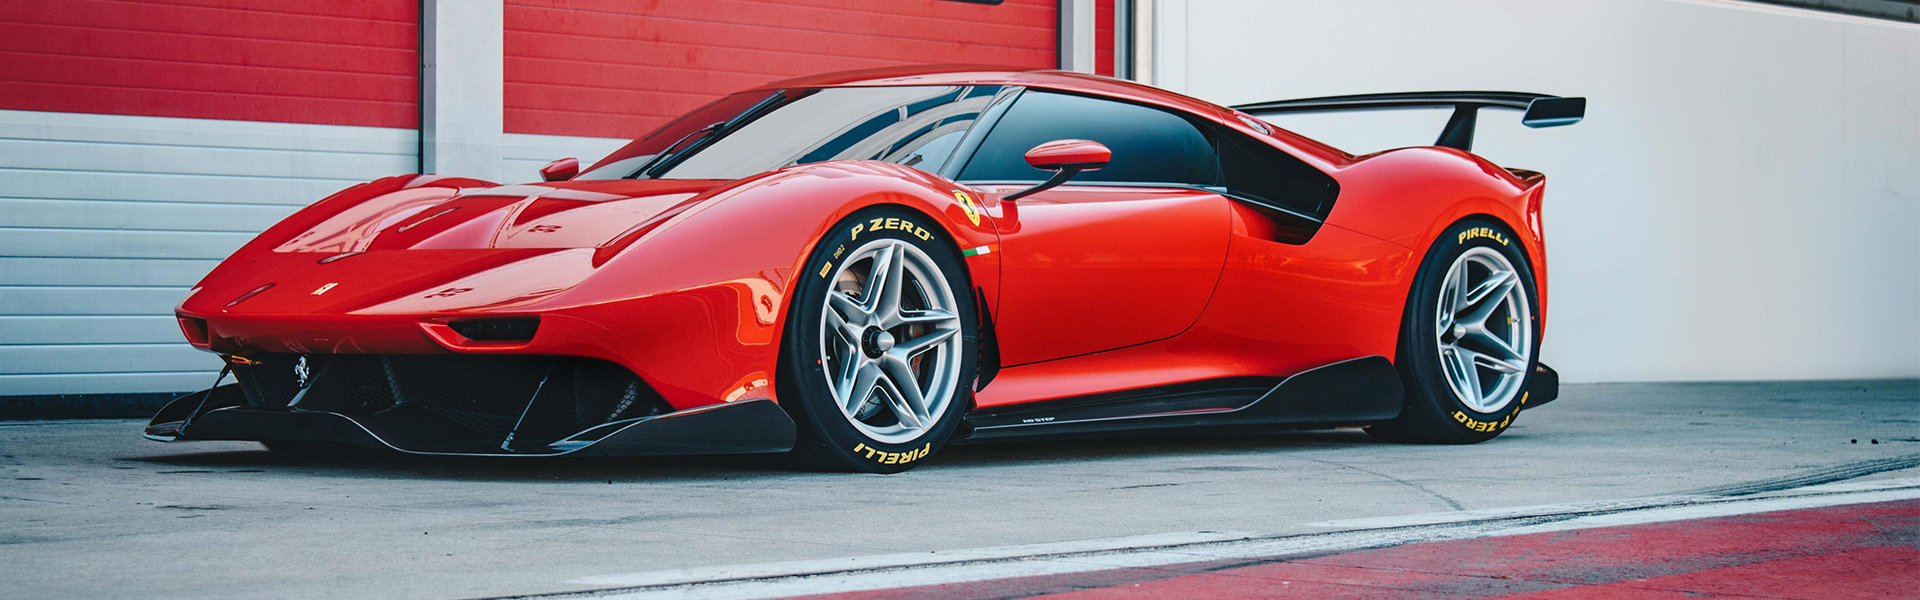 Why are most Ferrari’s red?